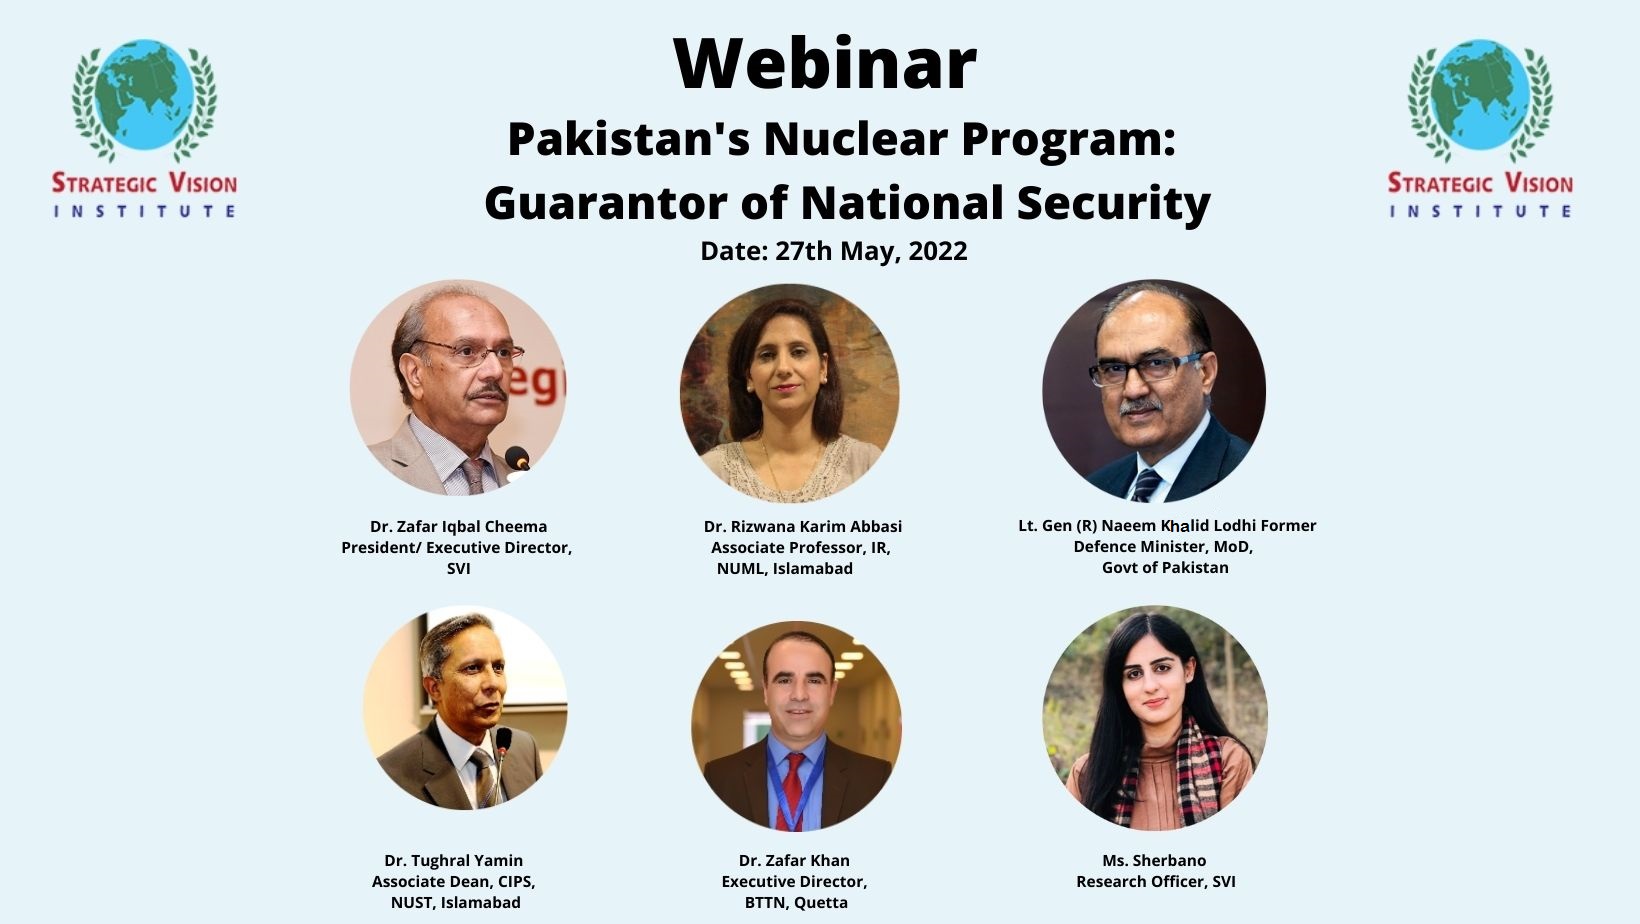 Webinar Report on “Pakistan’s Nuclear Program: Guarantor of National Security”- 27th May 2022